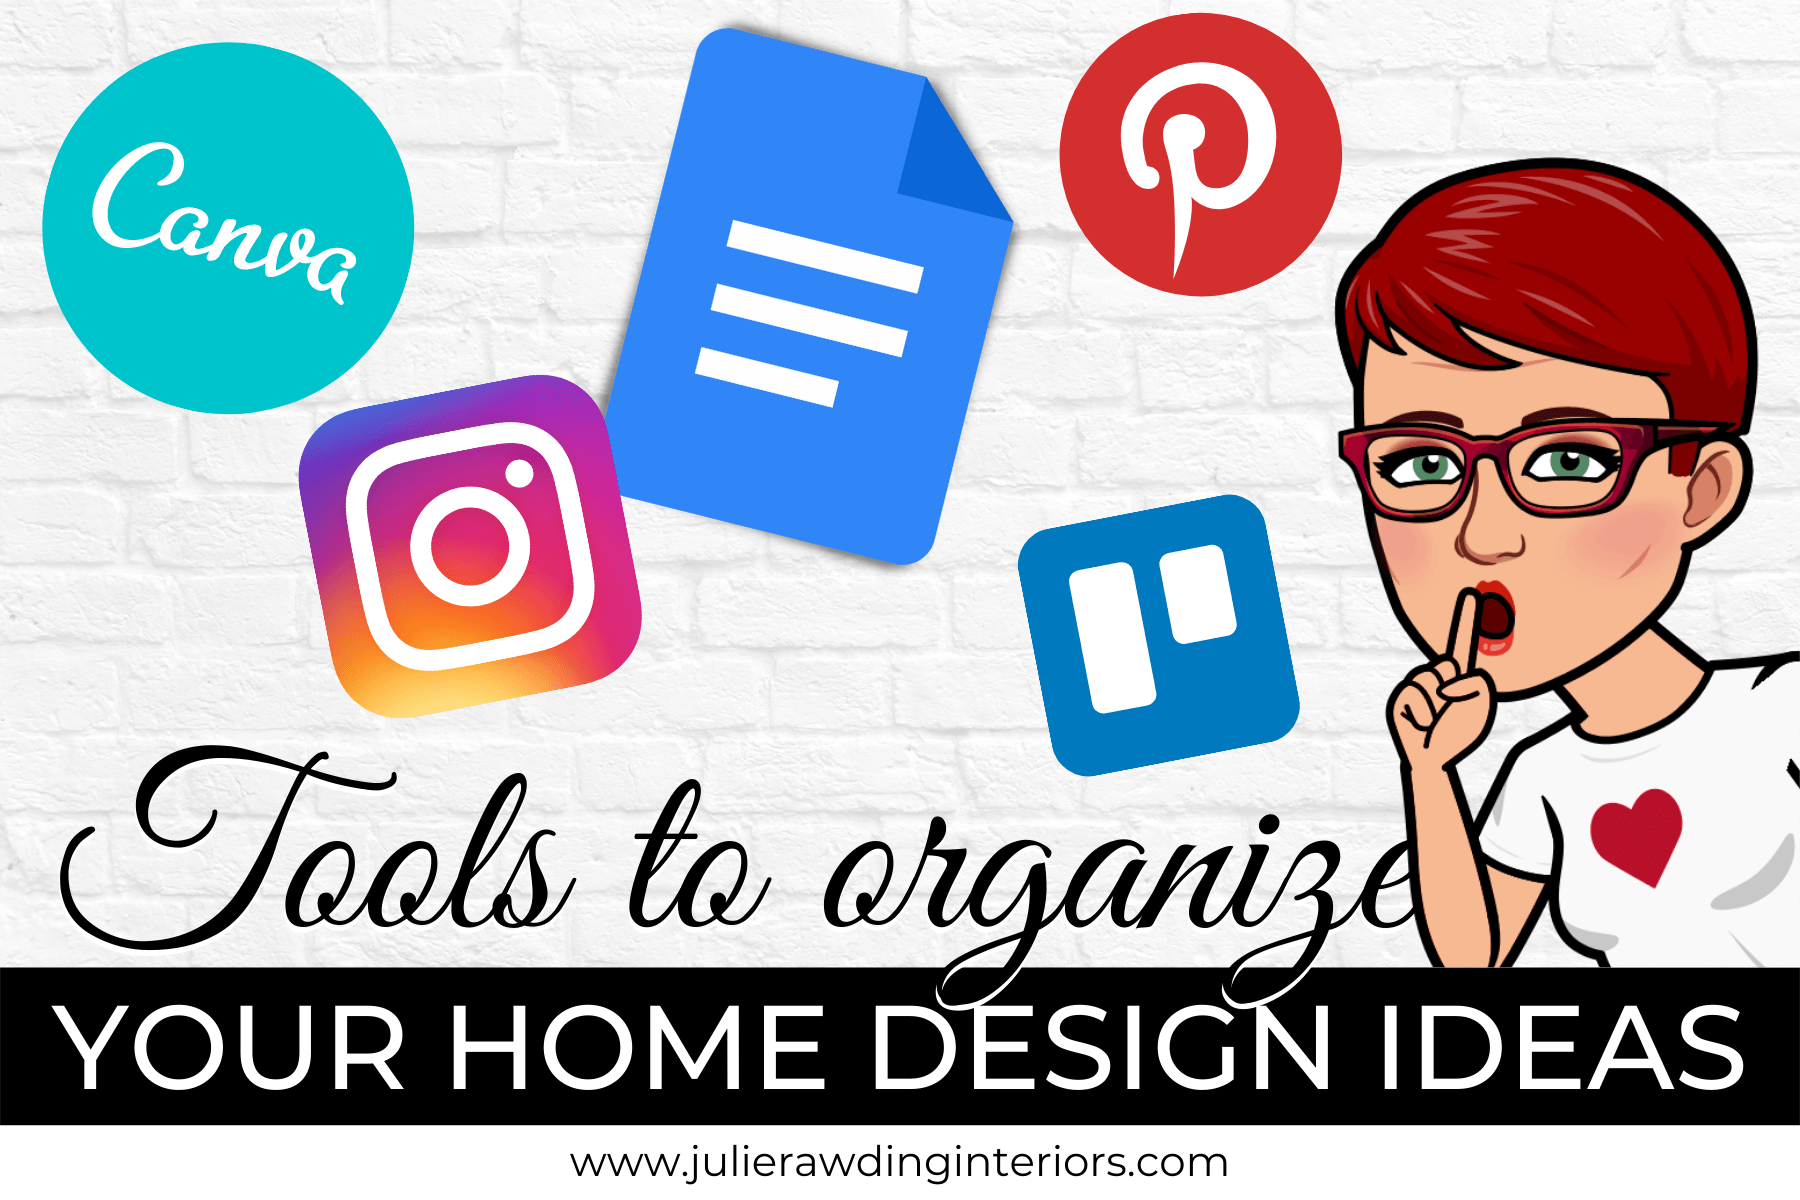 Free tools to organize your home design ideas